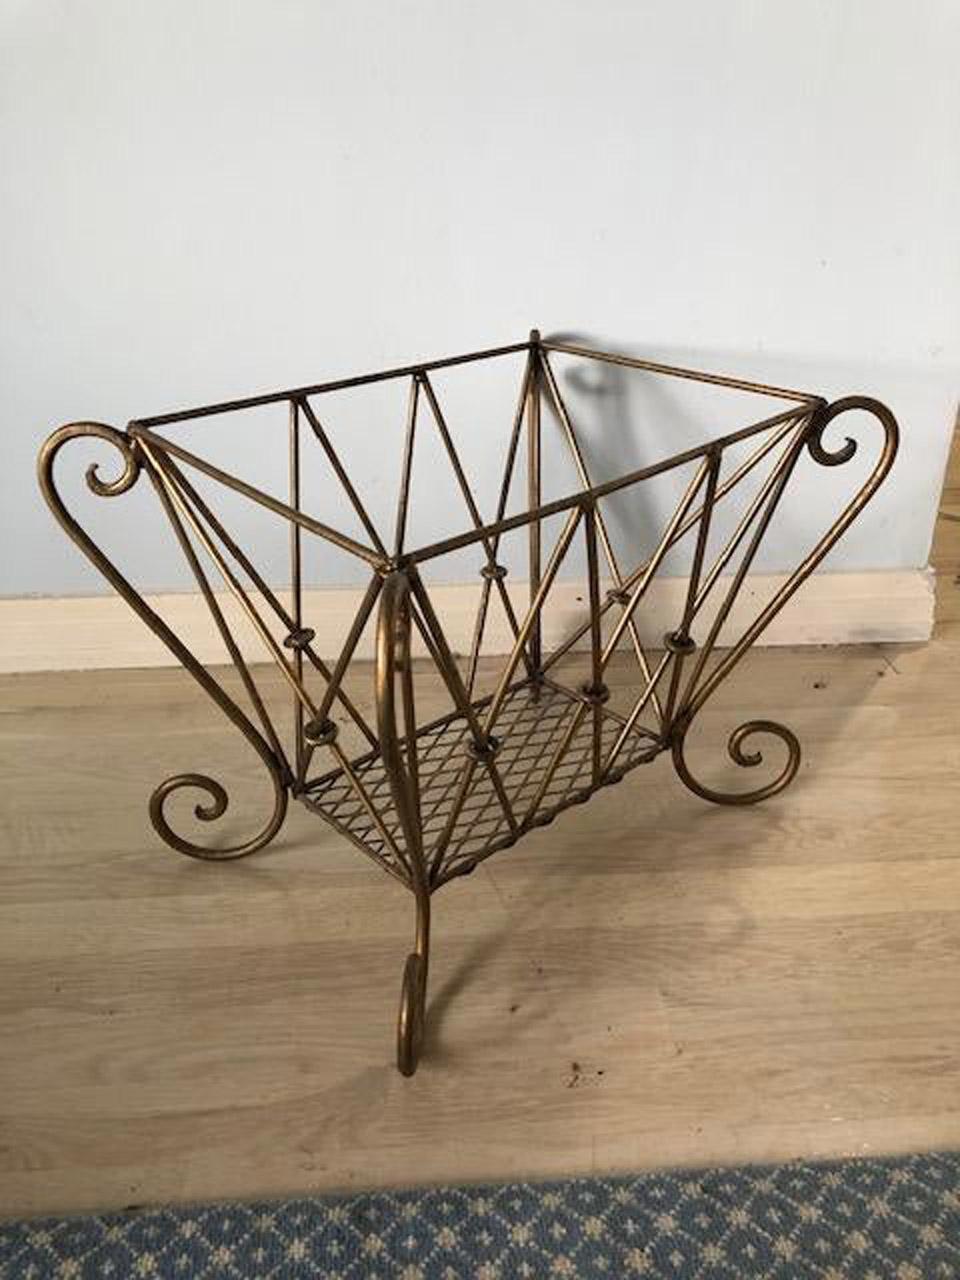 The vintage Hollywood Regency style magazine rack is made of gilt metal designed with a flare. Add a liner and it could become a log/kindling basket. Potted plant stand?